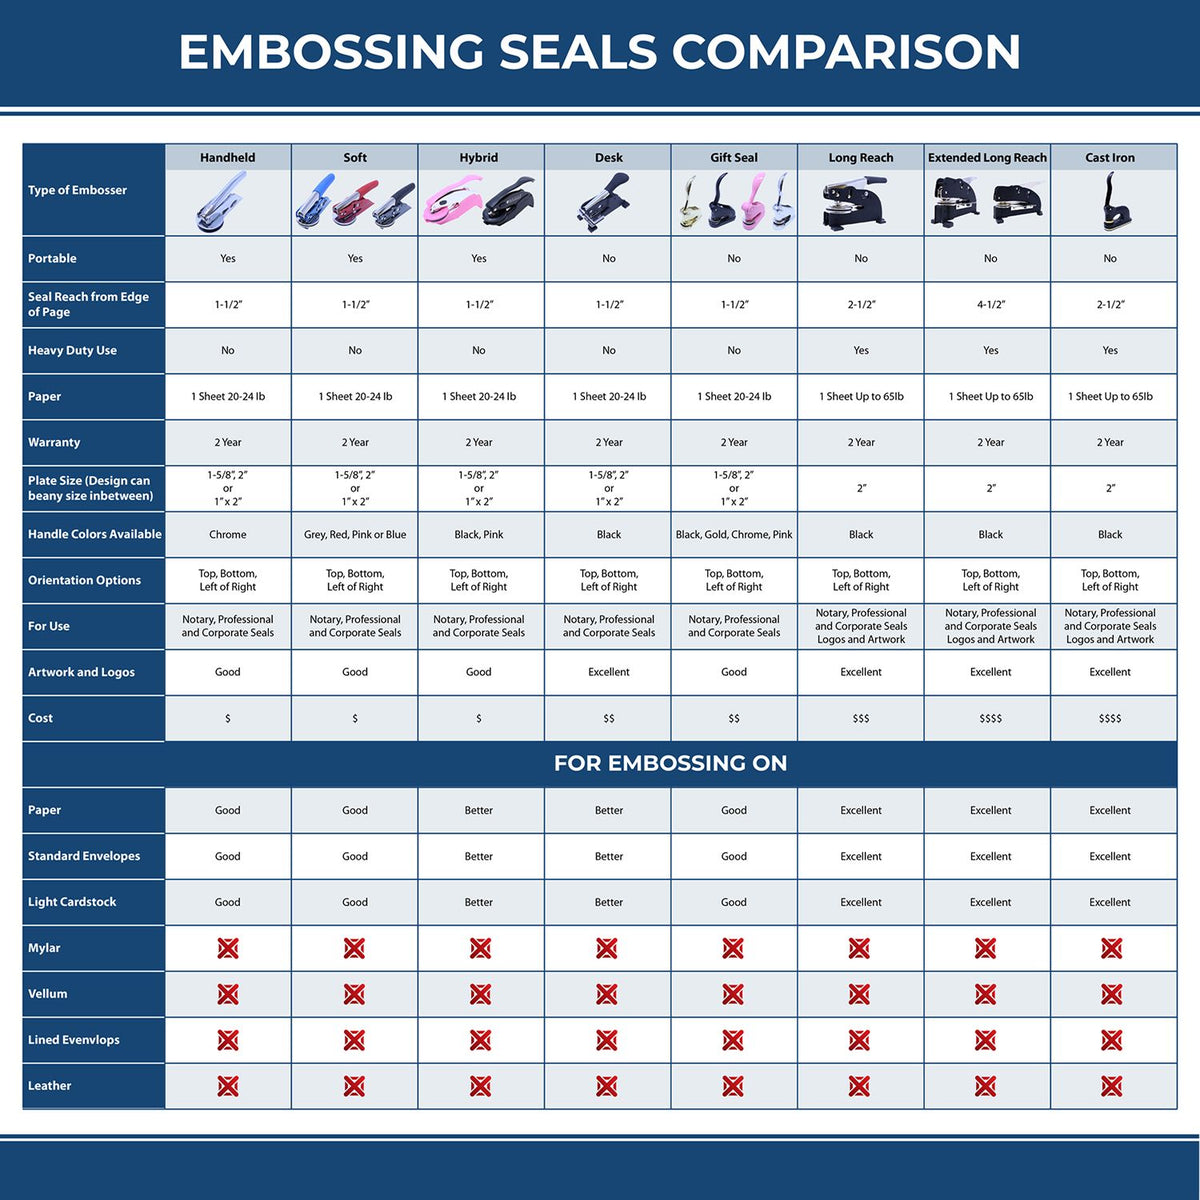 A comparison chart for the different types of mount models available for the Handheld Alaska Professional Geologist Embosser